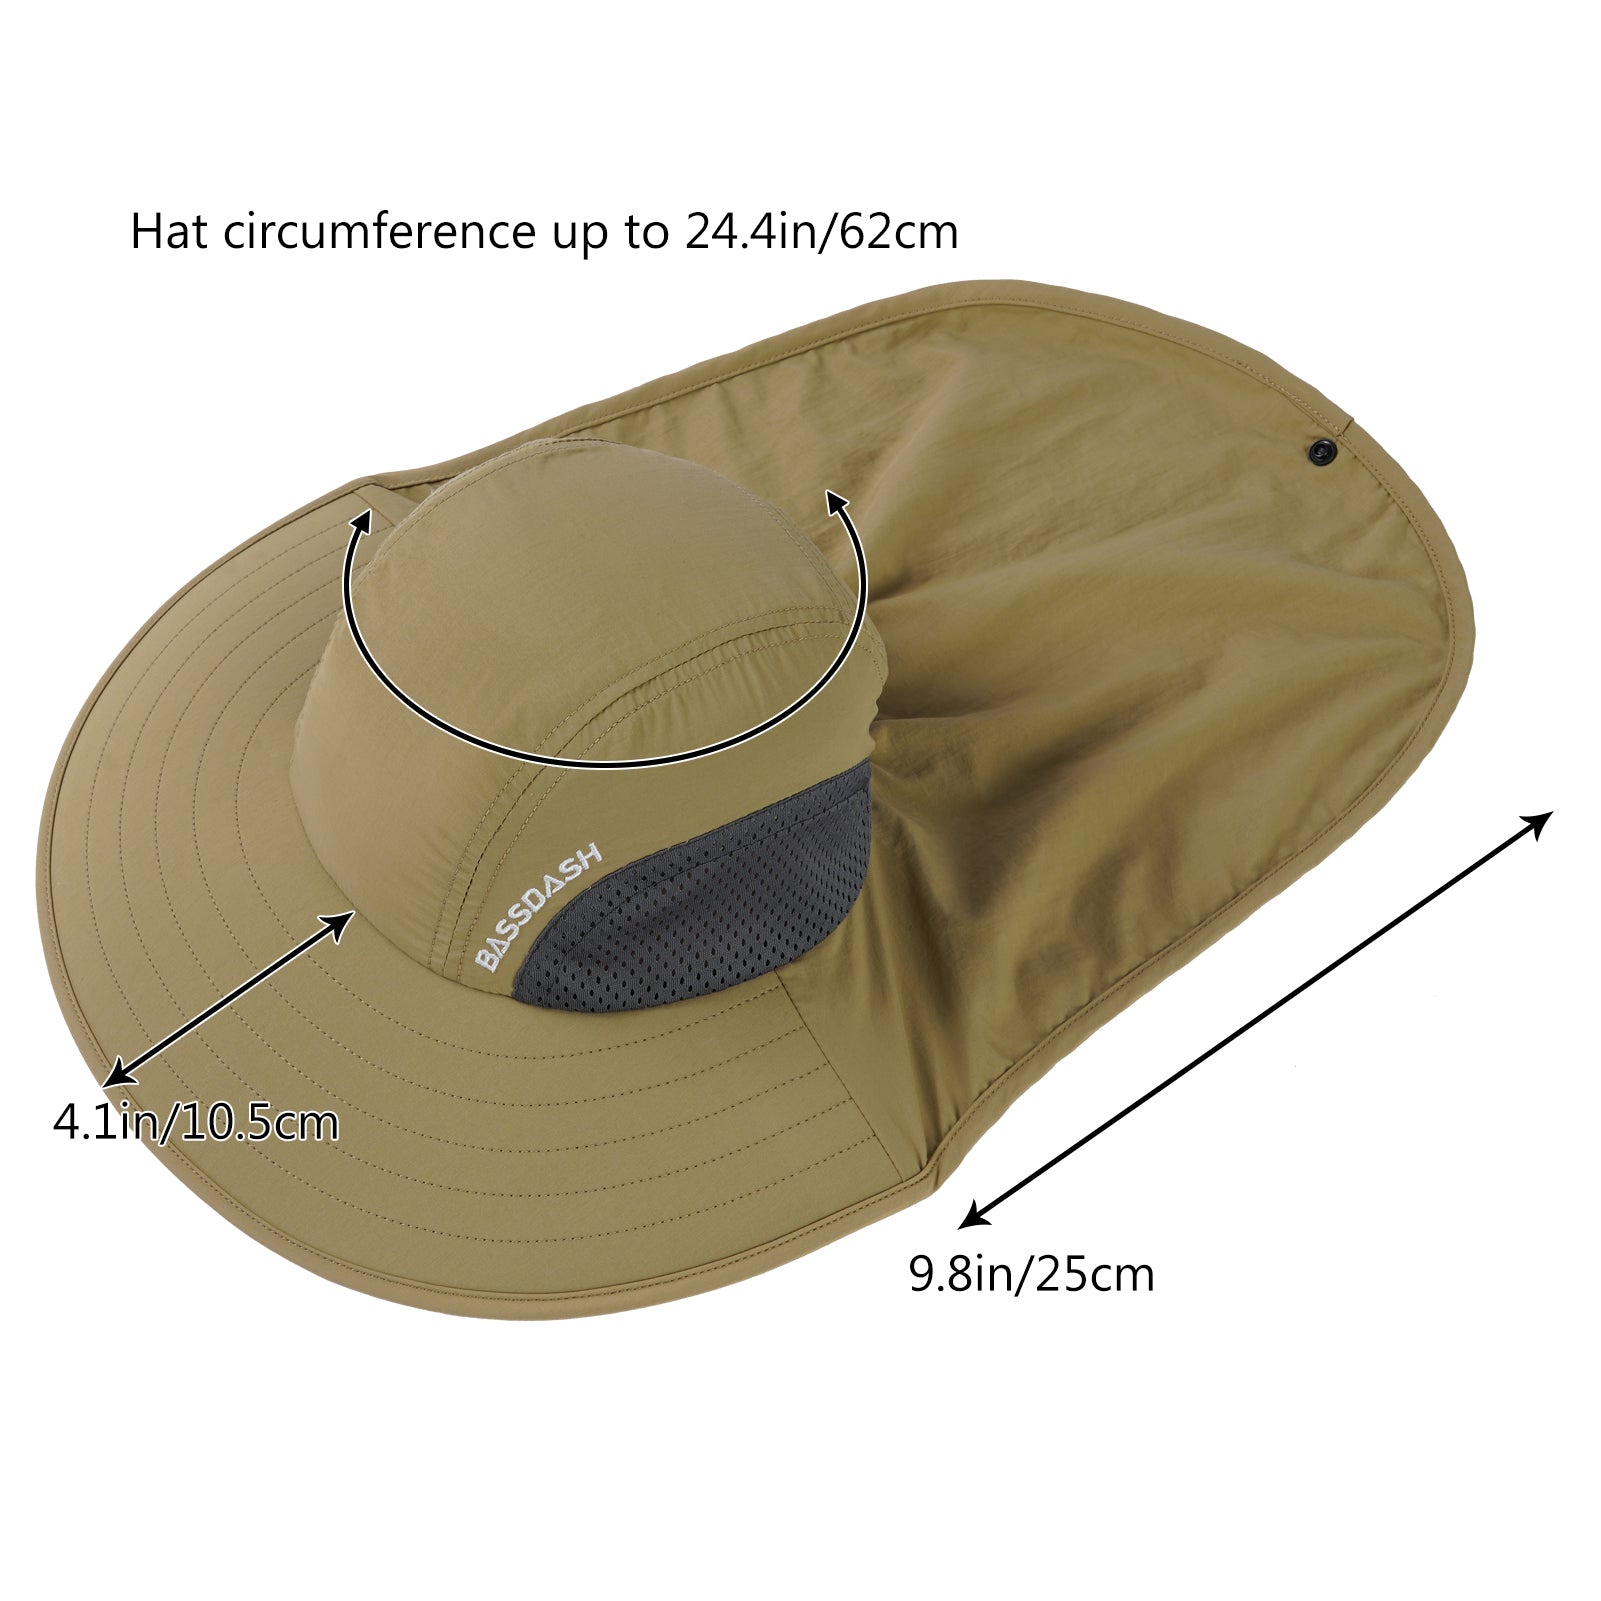 Unisex UPF 50+ Water Resistant Sun Hat with Neck Flap FH06, Cream